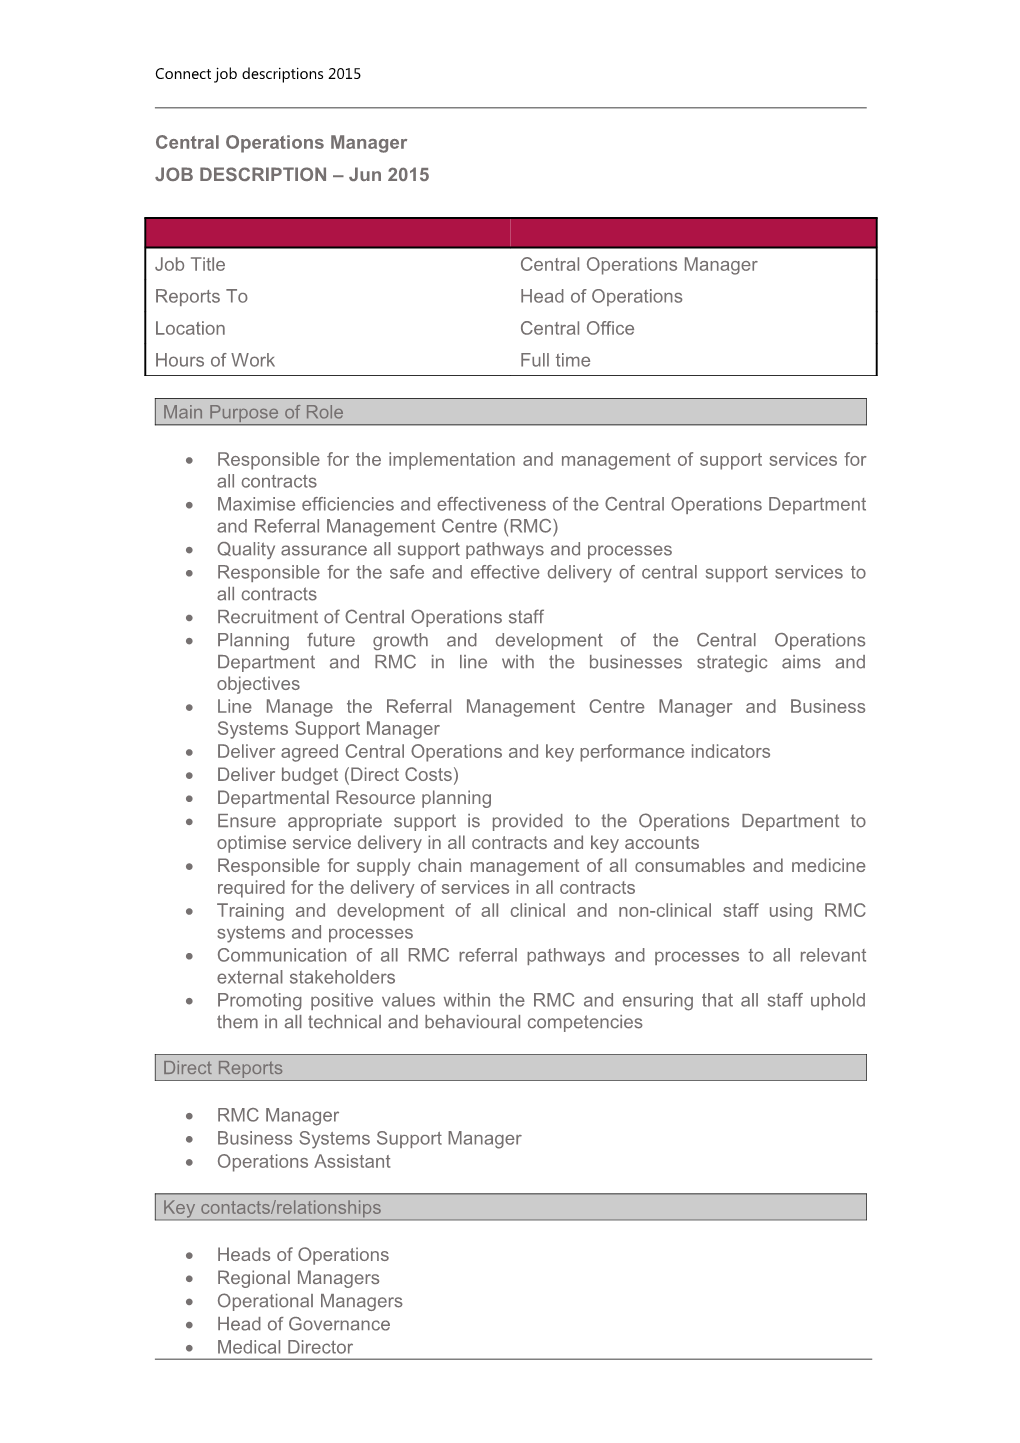 Central Operations Manager